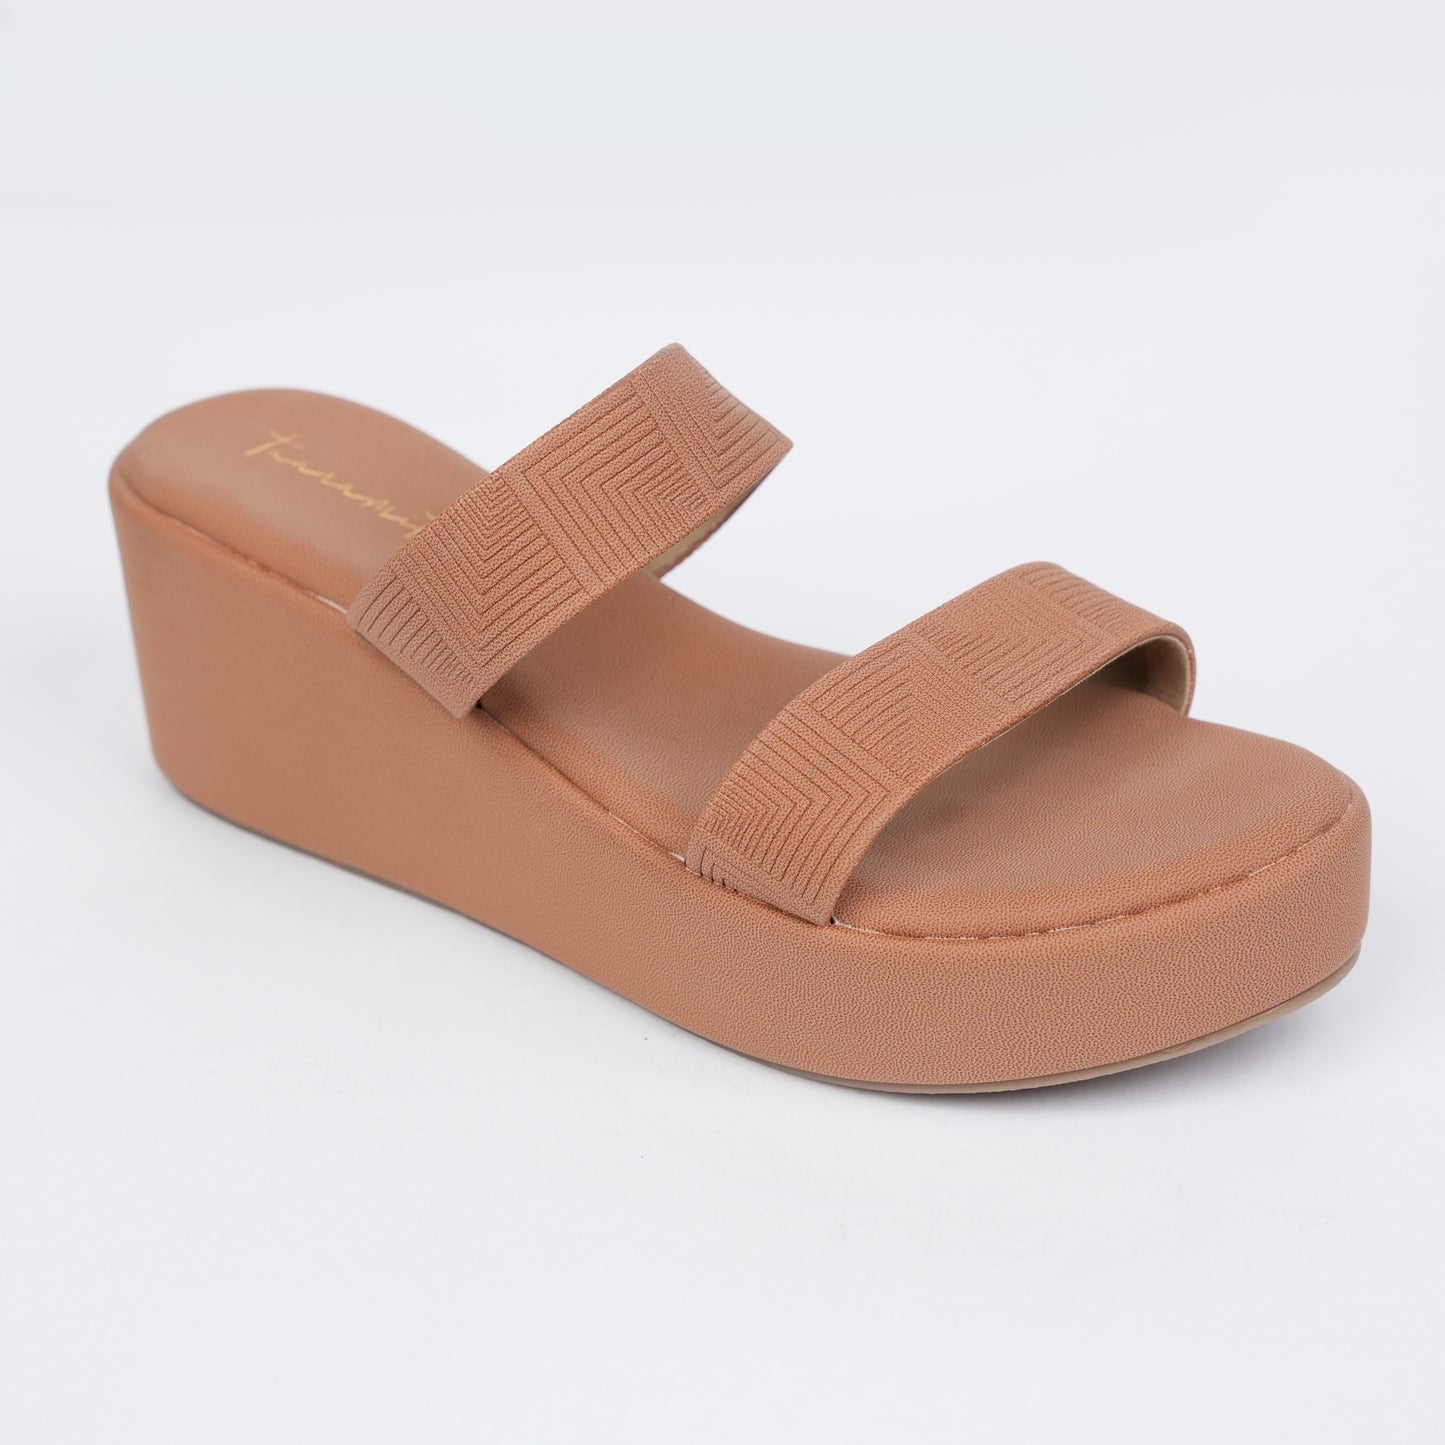 Ria two strap wedges in tan